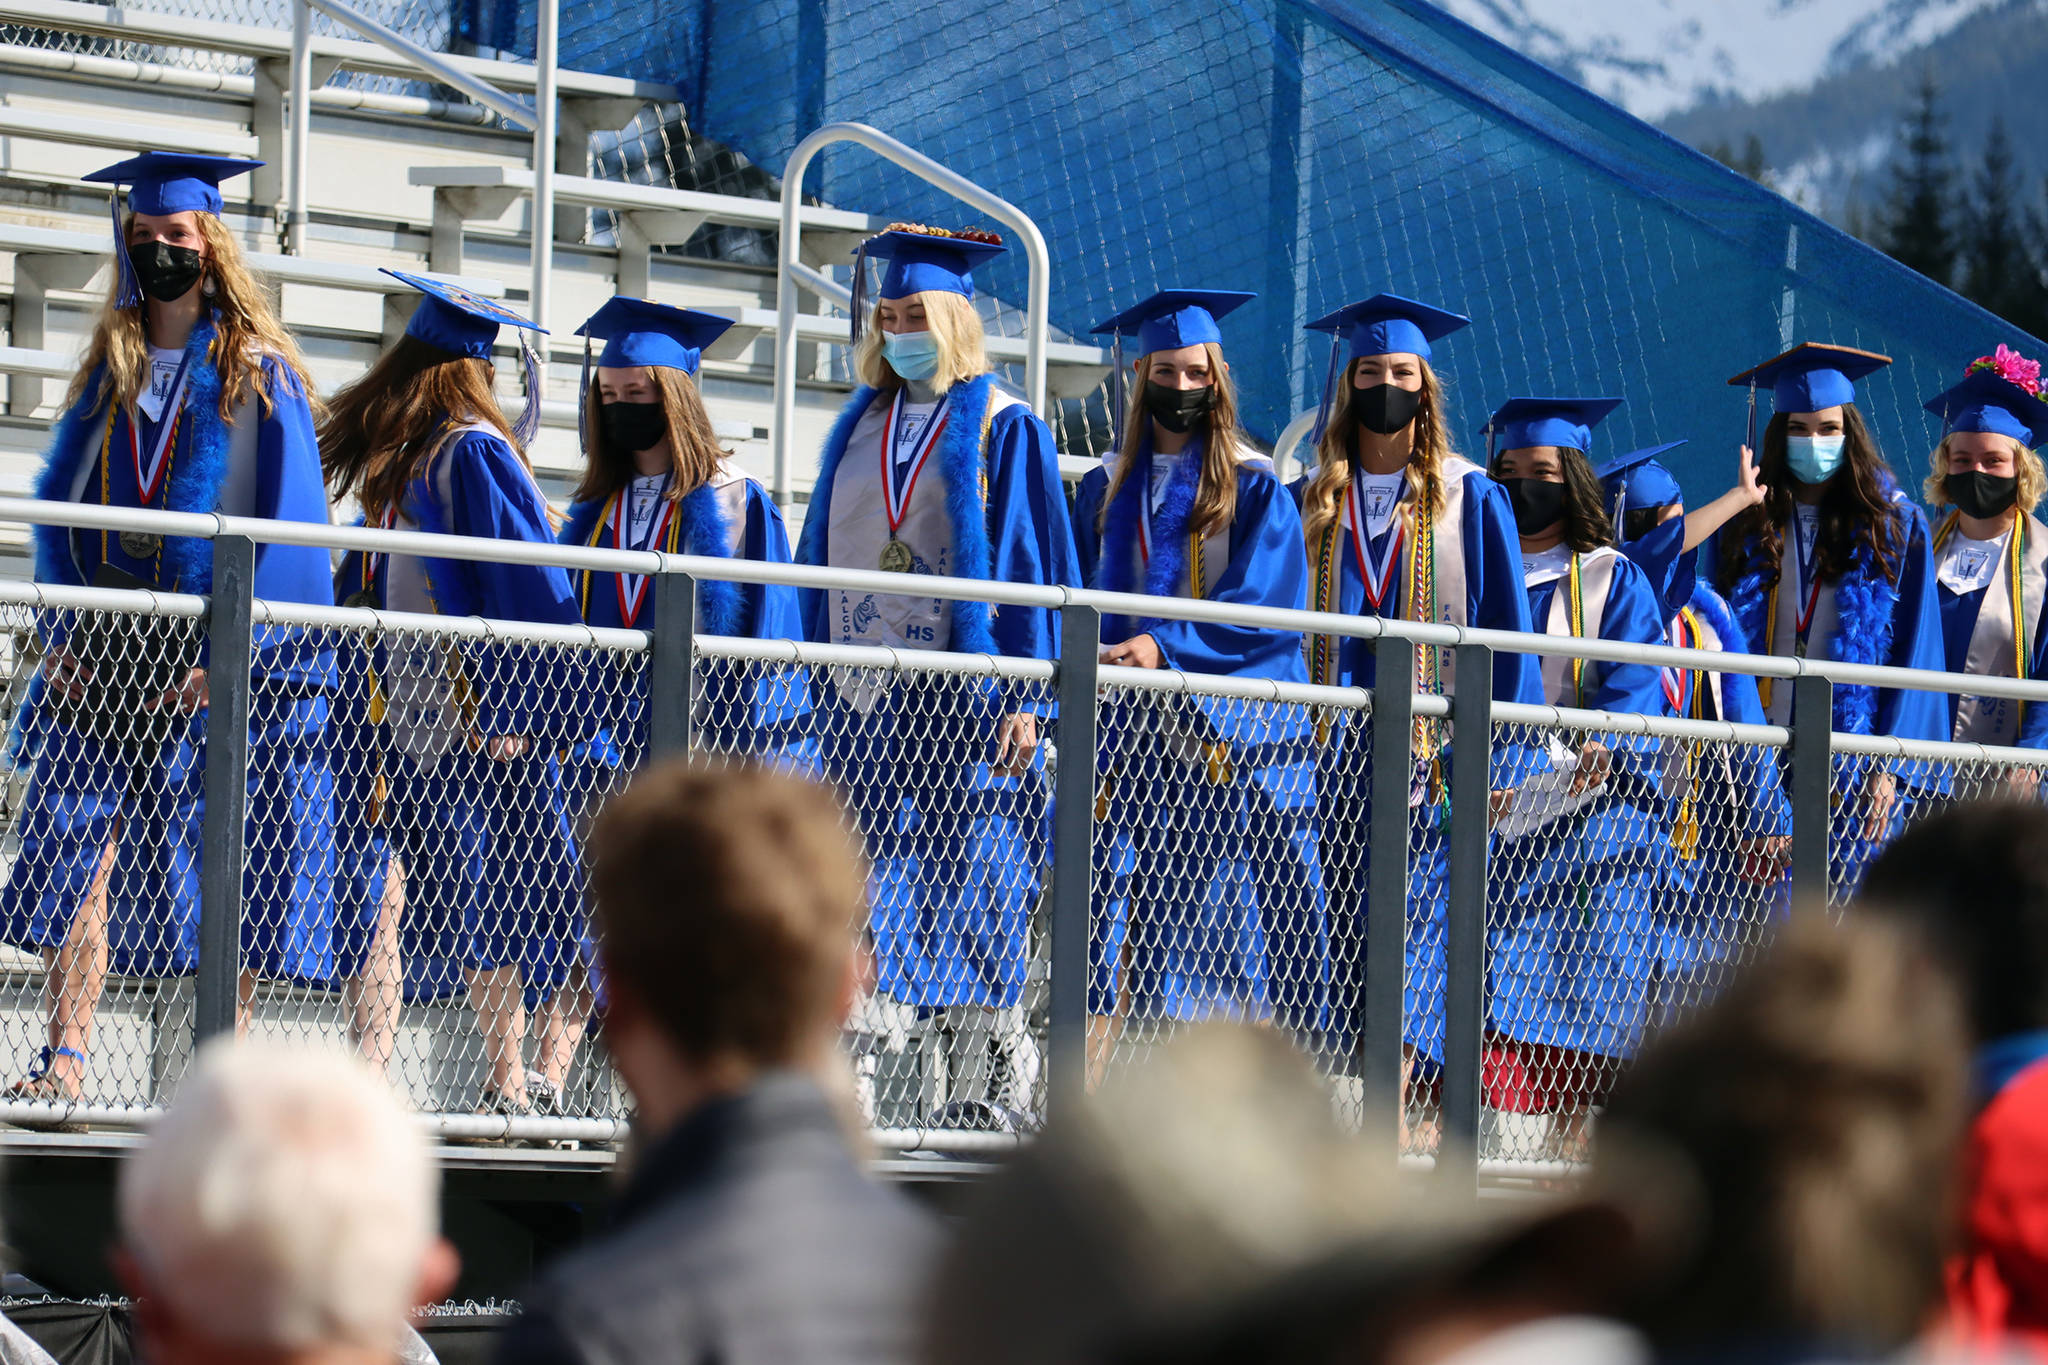 Members of the Thunder Mountain High School Class of 2021 file into the bleachers at Thunder Mountain High School. A distanced, masked and outdoor event was held at TMHS on Sunday. 
Ben Hohenstatt / Juneau Empire